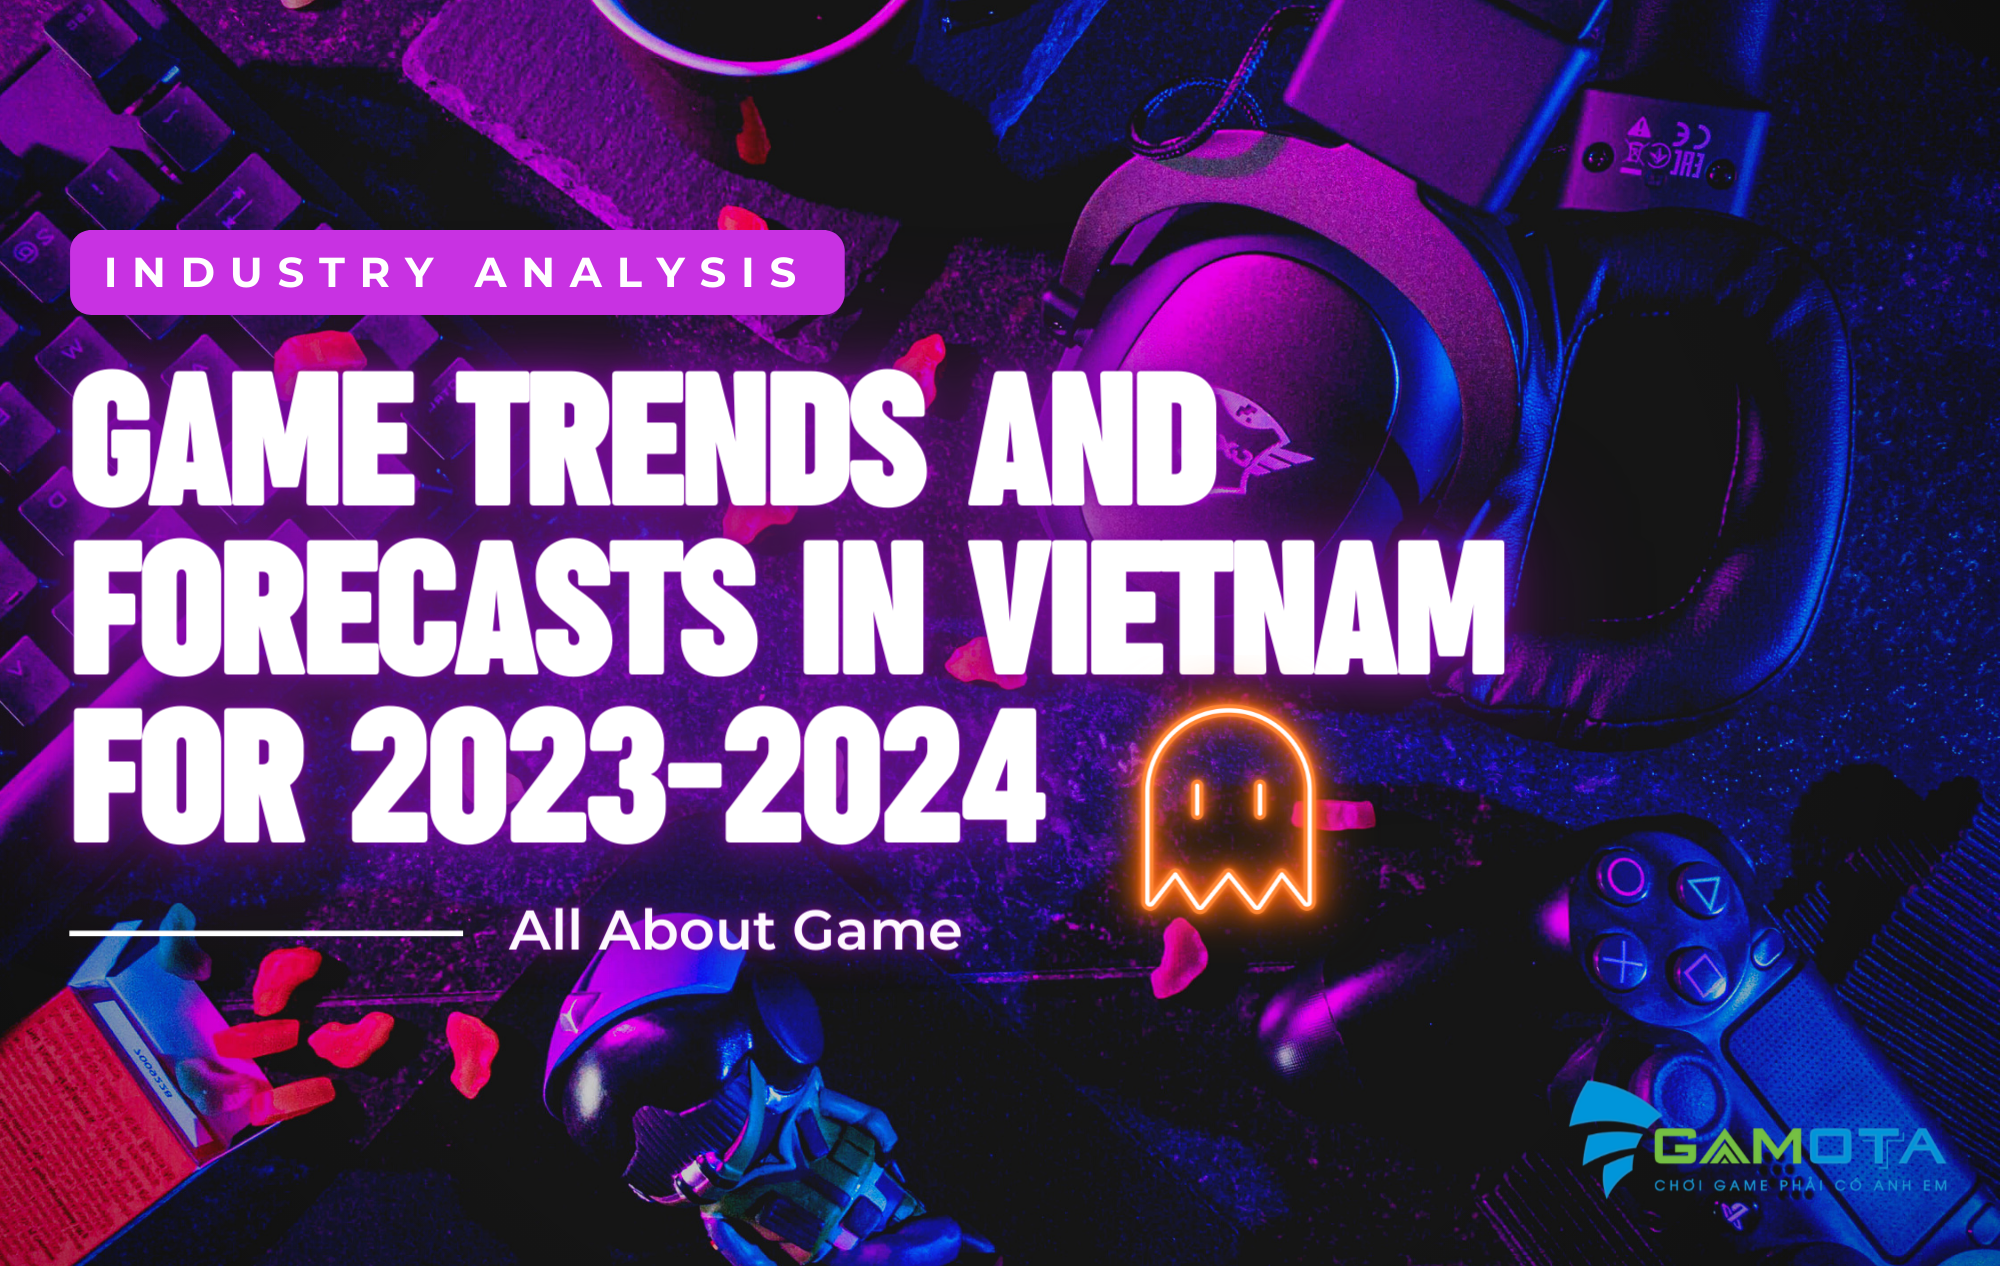 Game Trends and Forecasts in Vietnam for 2023-2024